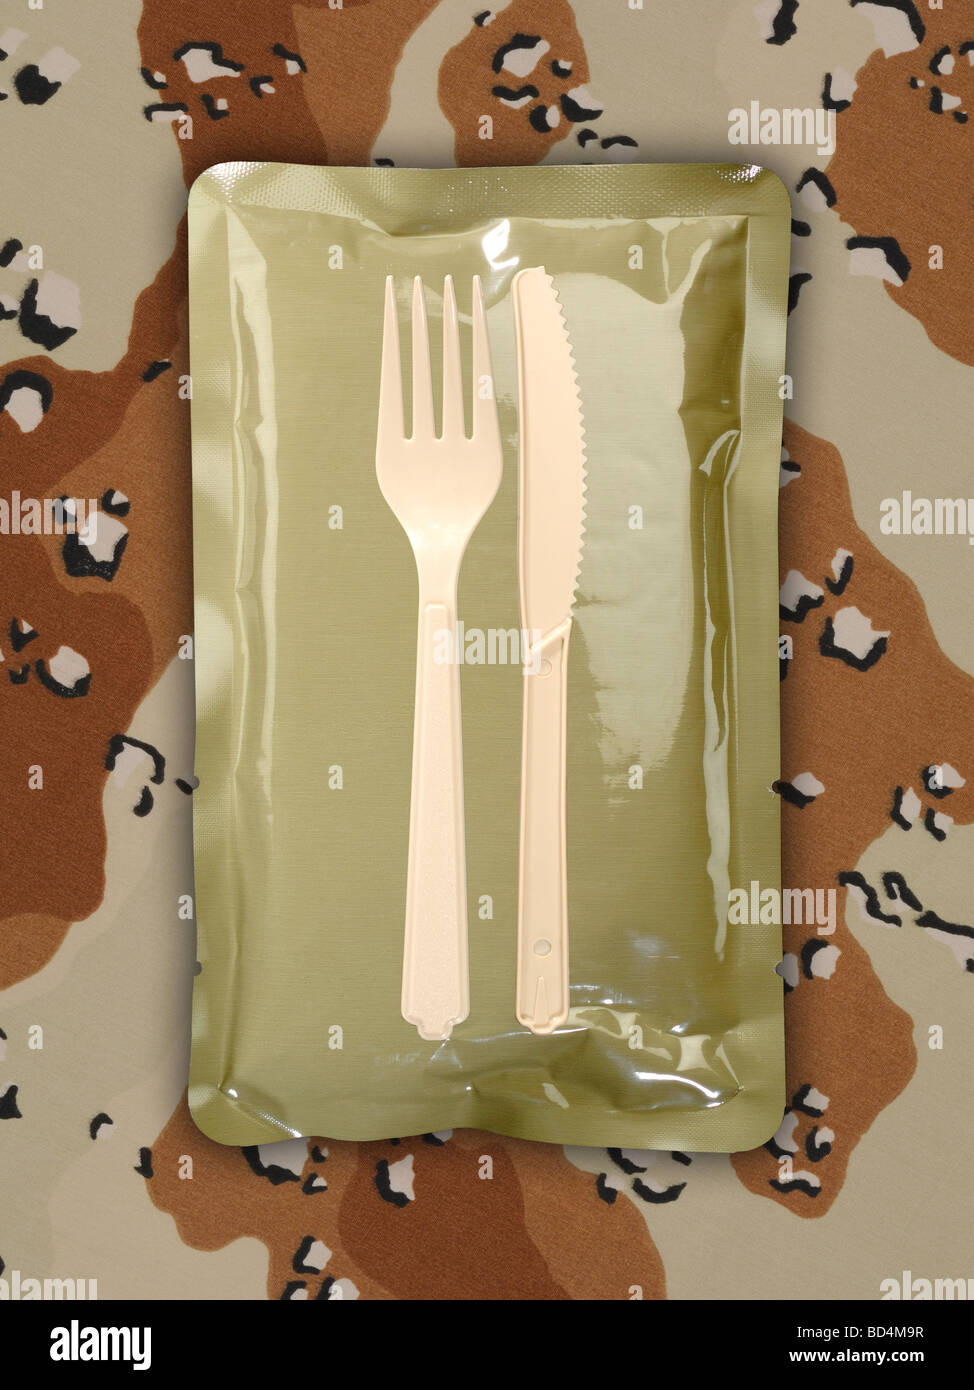 One military food ration package with  eating utensils on a background of tan camouflage Stock Photo